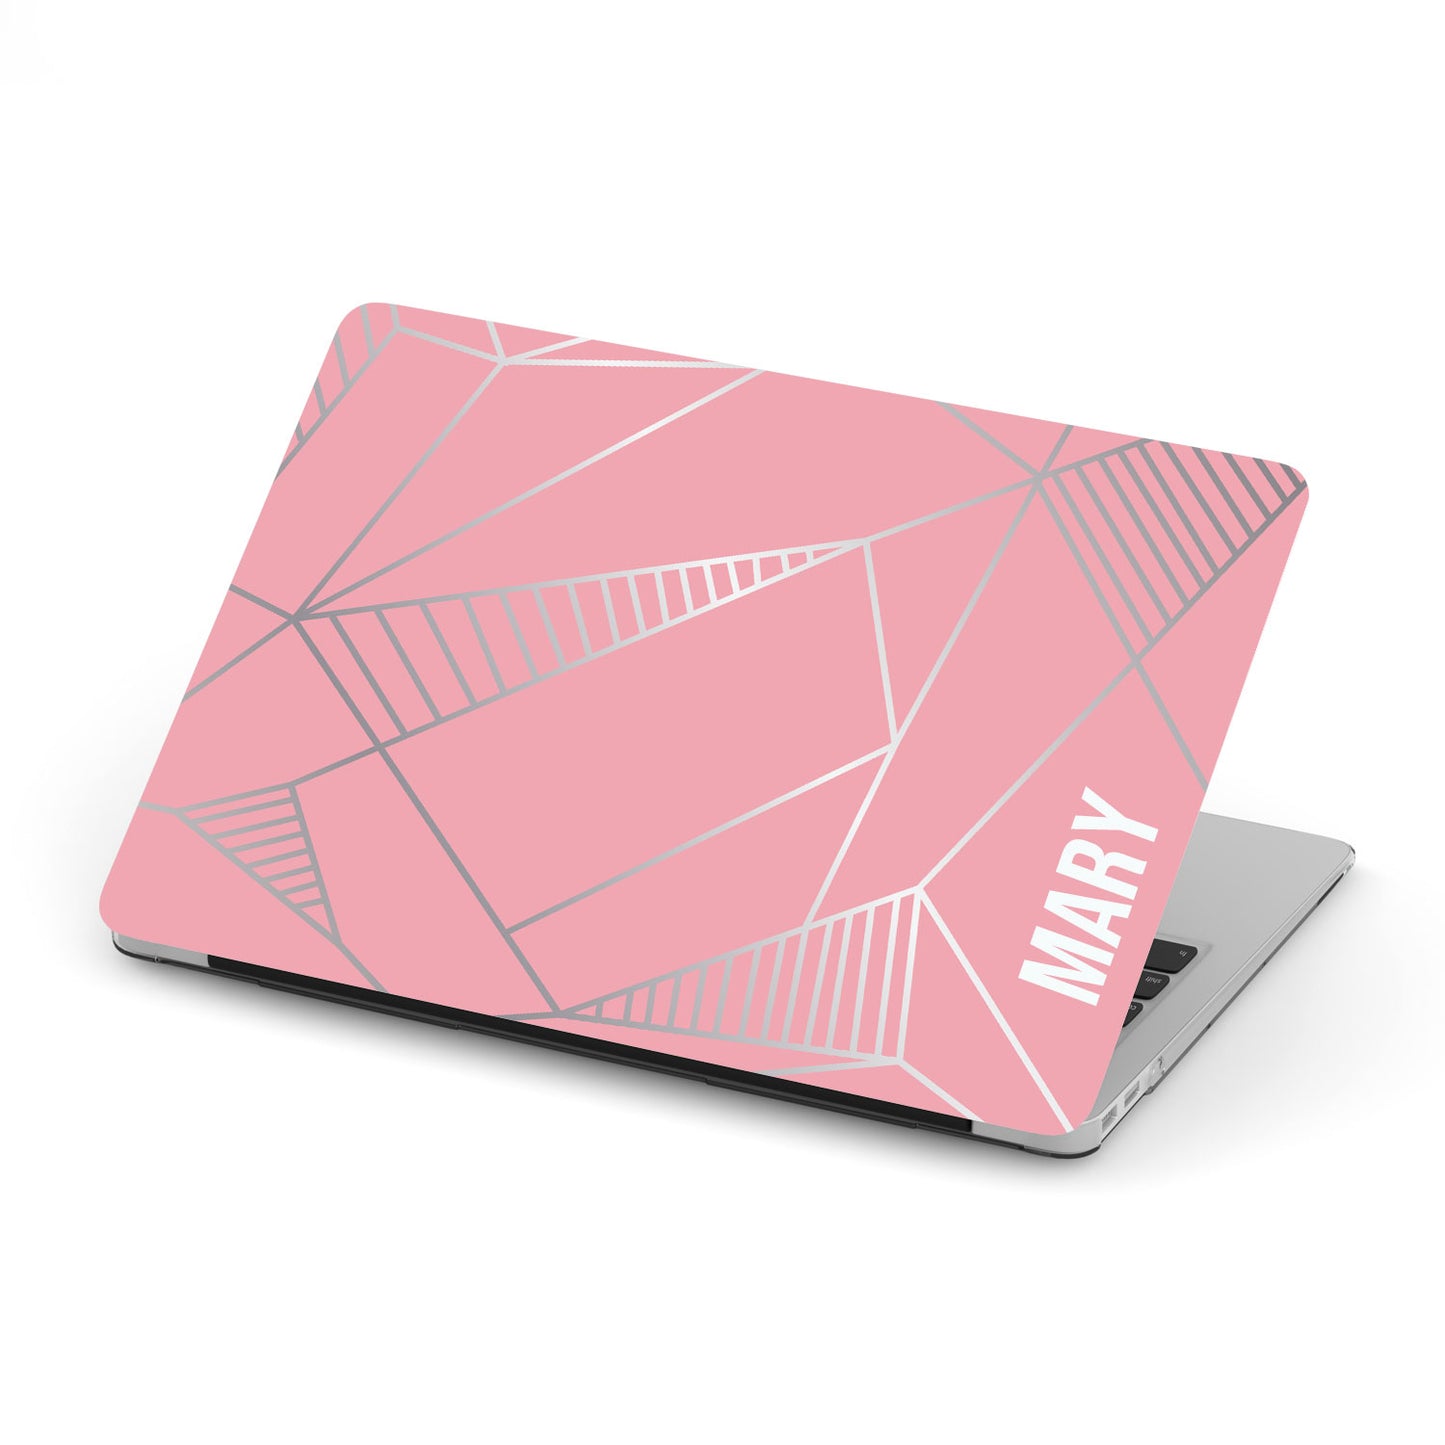 Personalized Macbook Hard Shell Case - Pink & Silver Geometric